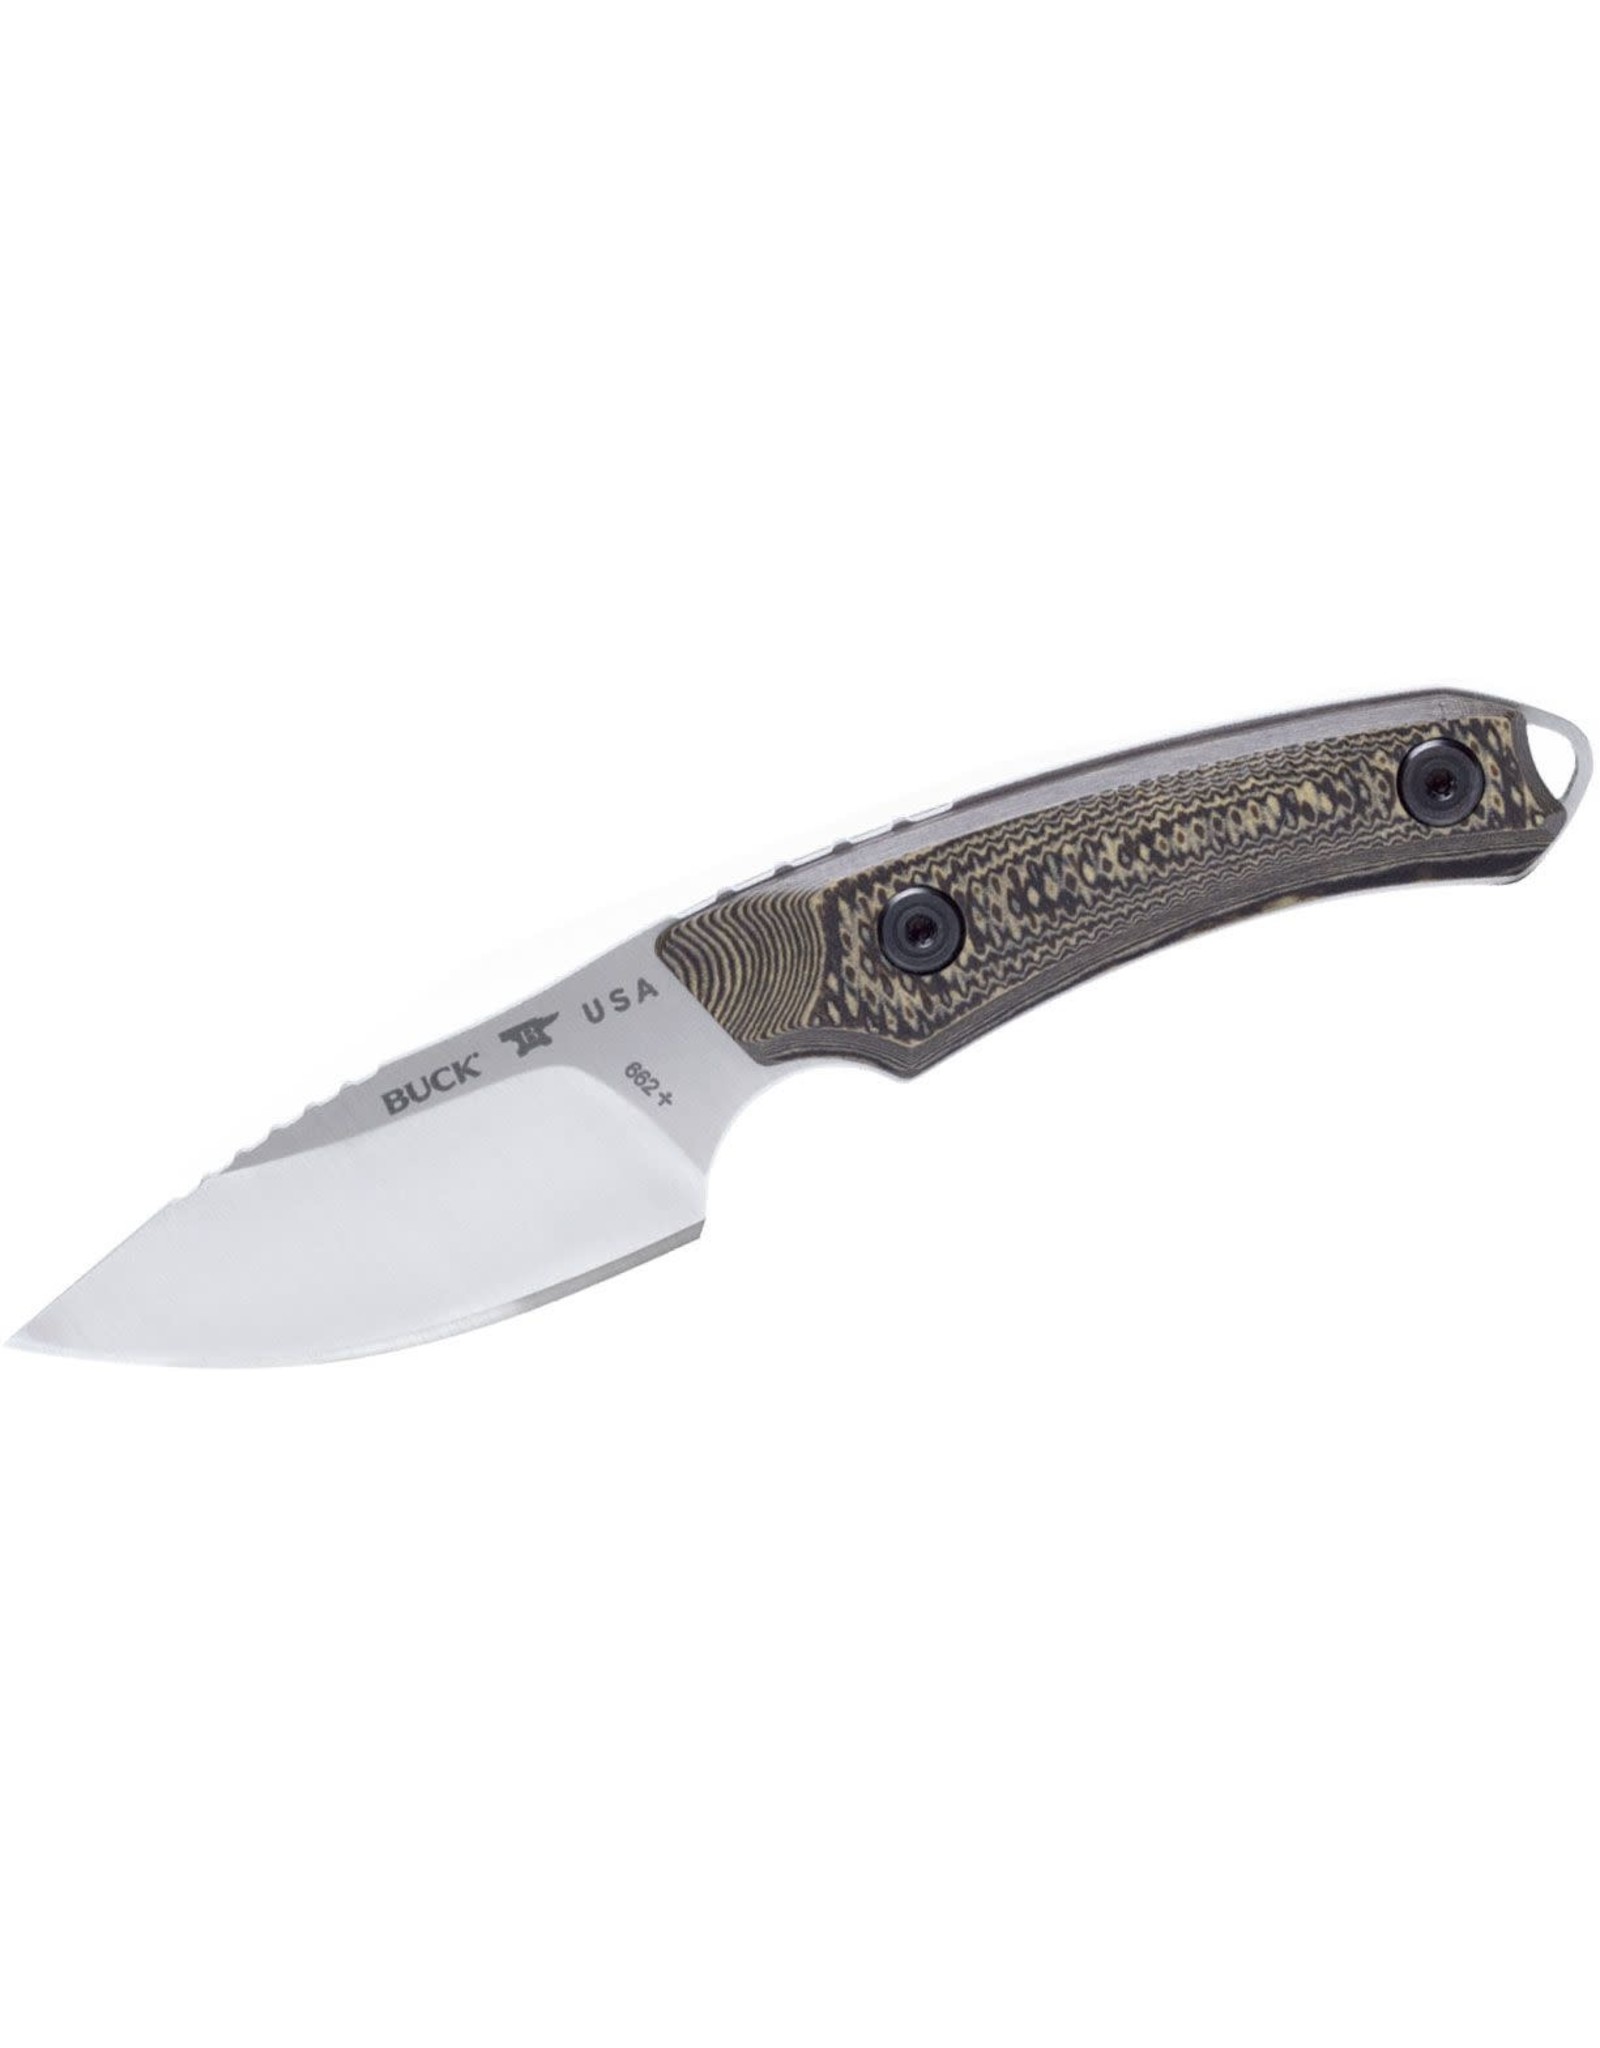 Buck Knives Buck 662 Alpha Scout Fixed Blade Knife 2.875" S35VN Satin Drop Point, Layered Gorge Patterned Richlite Handles, Leather Sheath - 13463